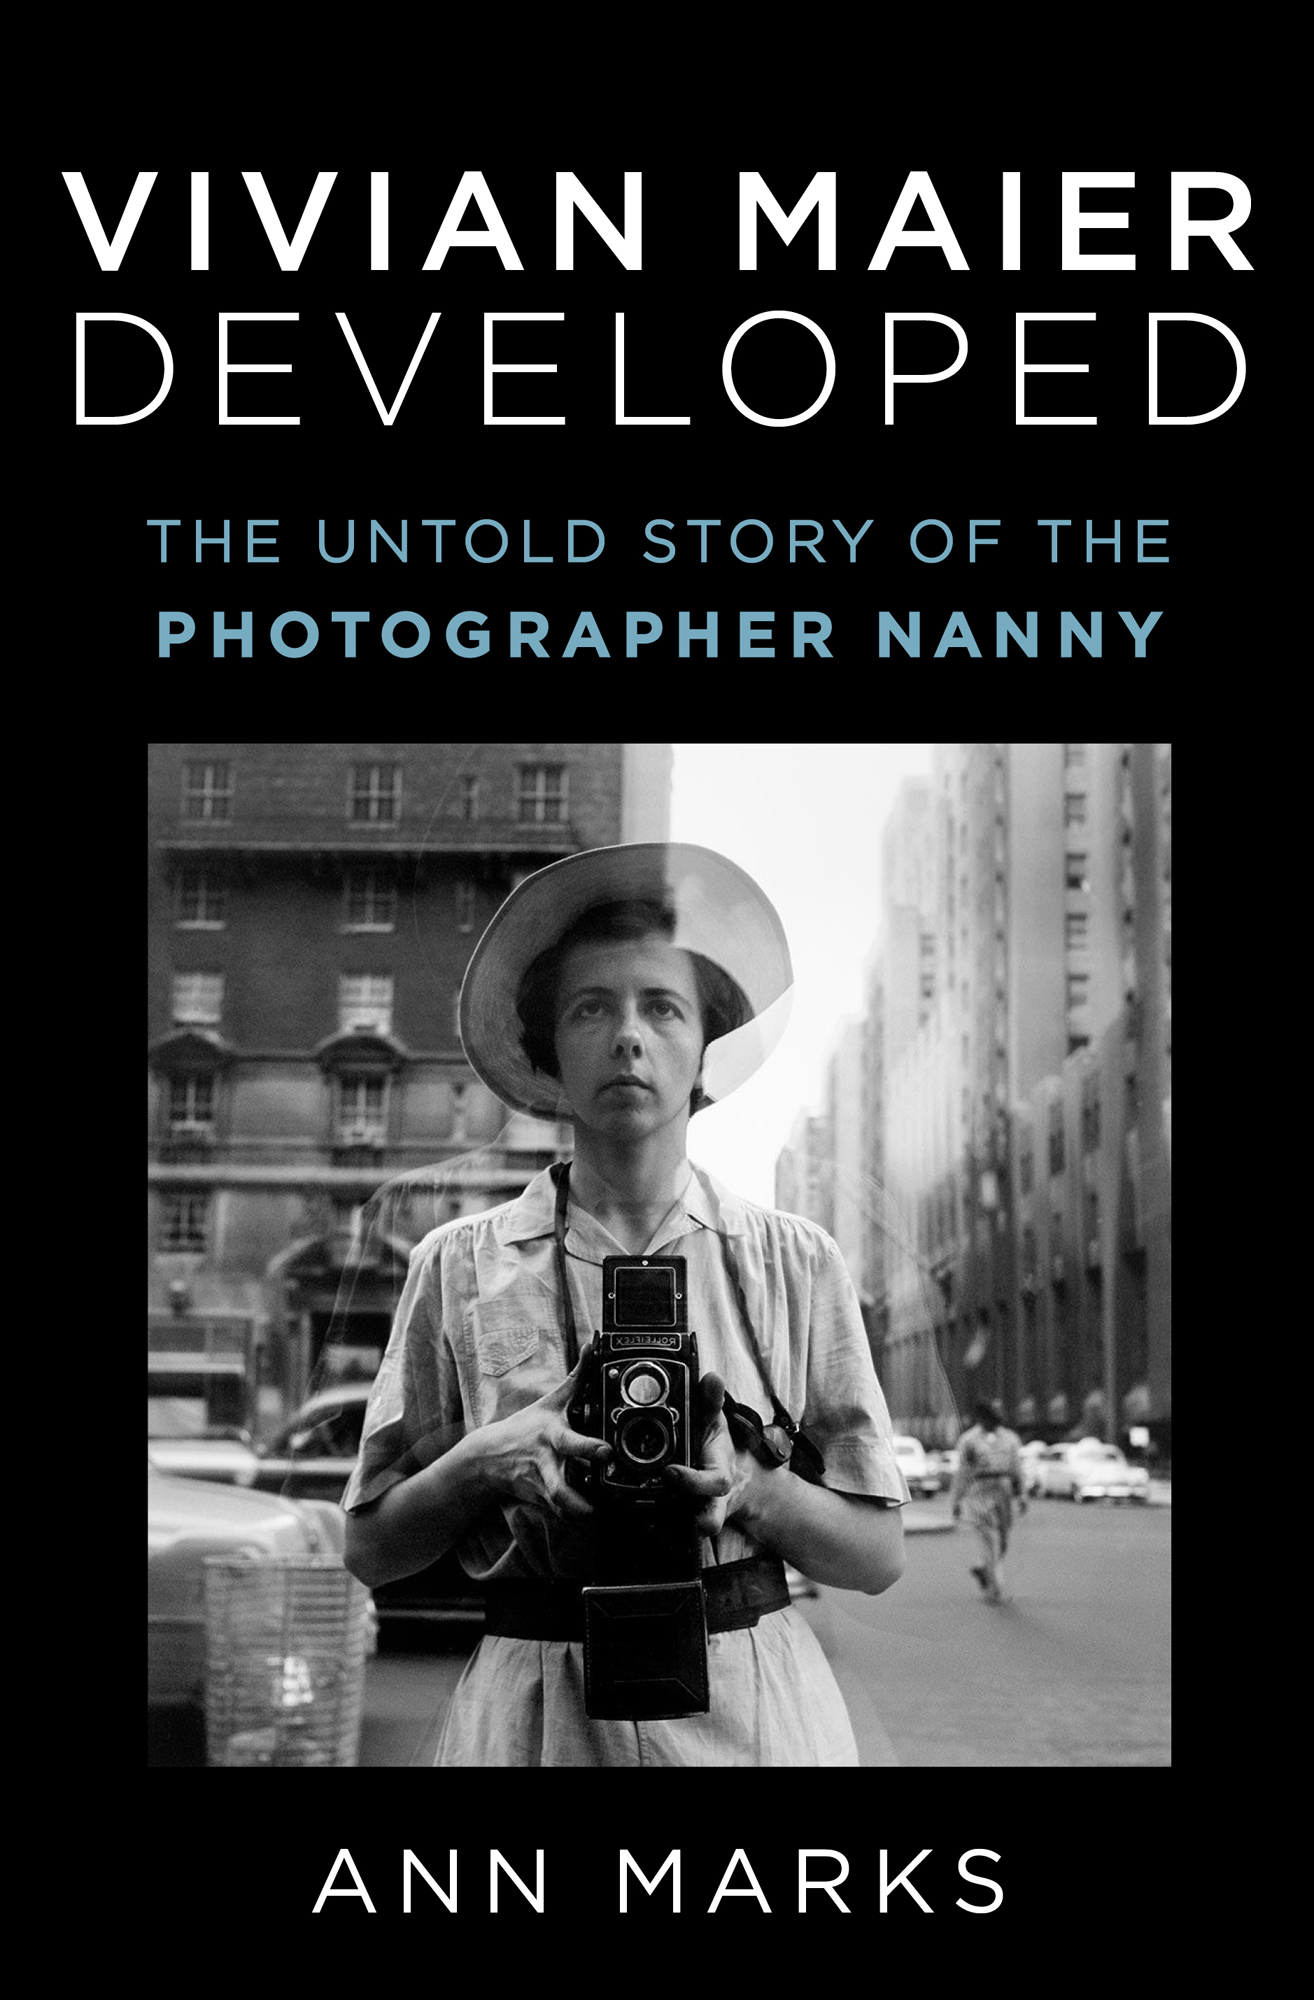 Vivian Maier Developed The Untold Story of the Photographer Nanny Ann Marks - photo 1